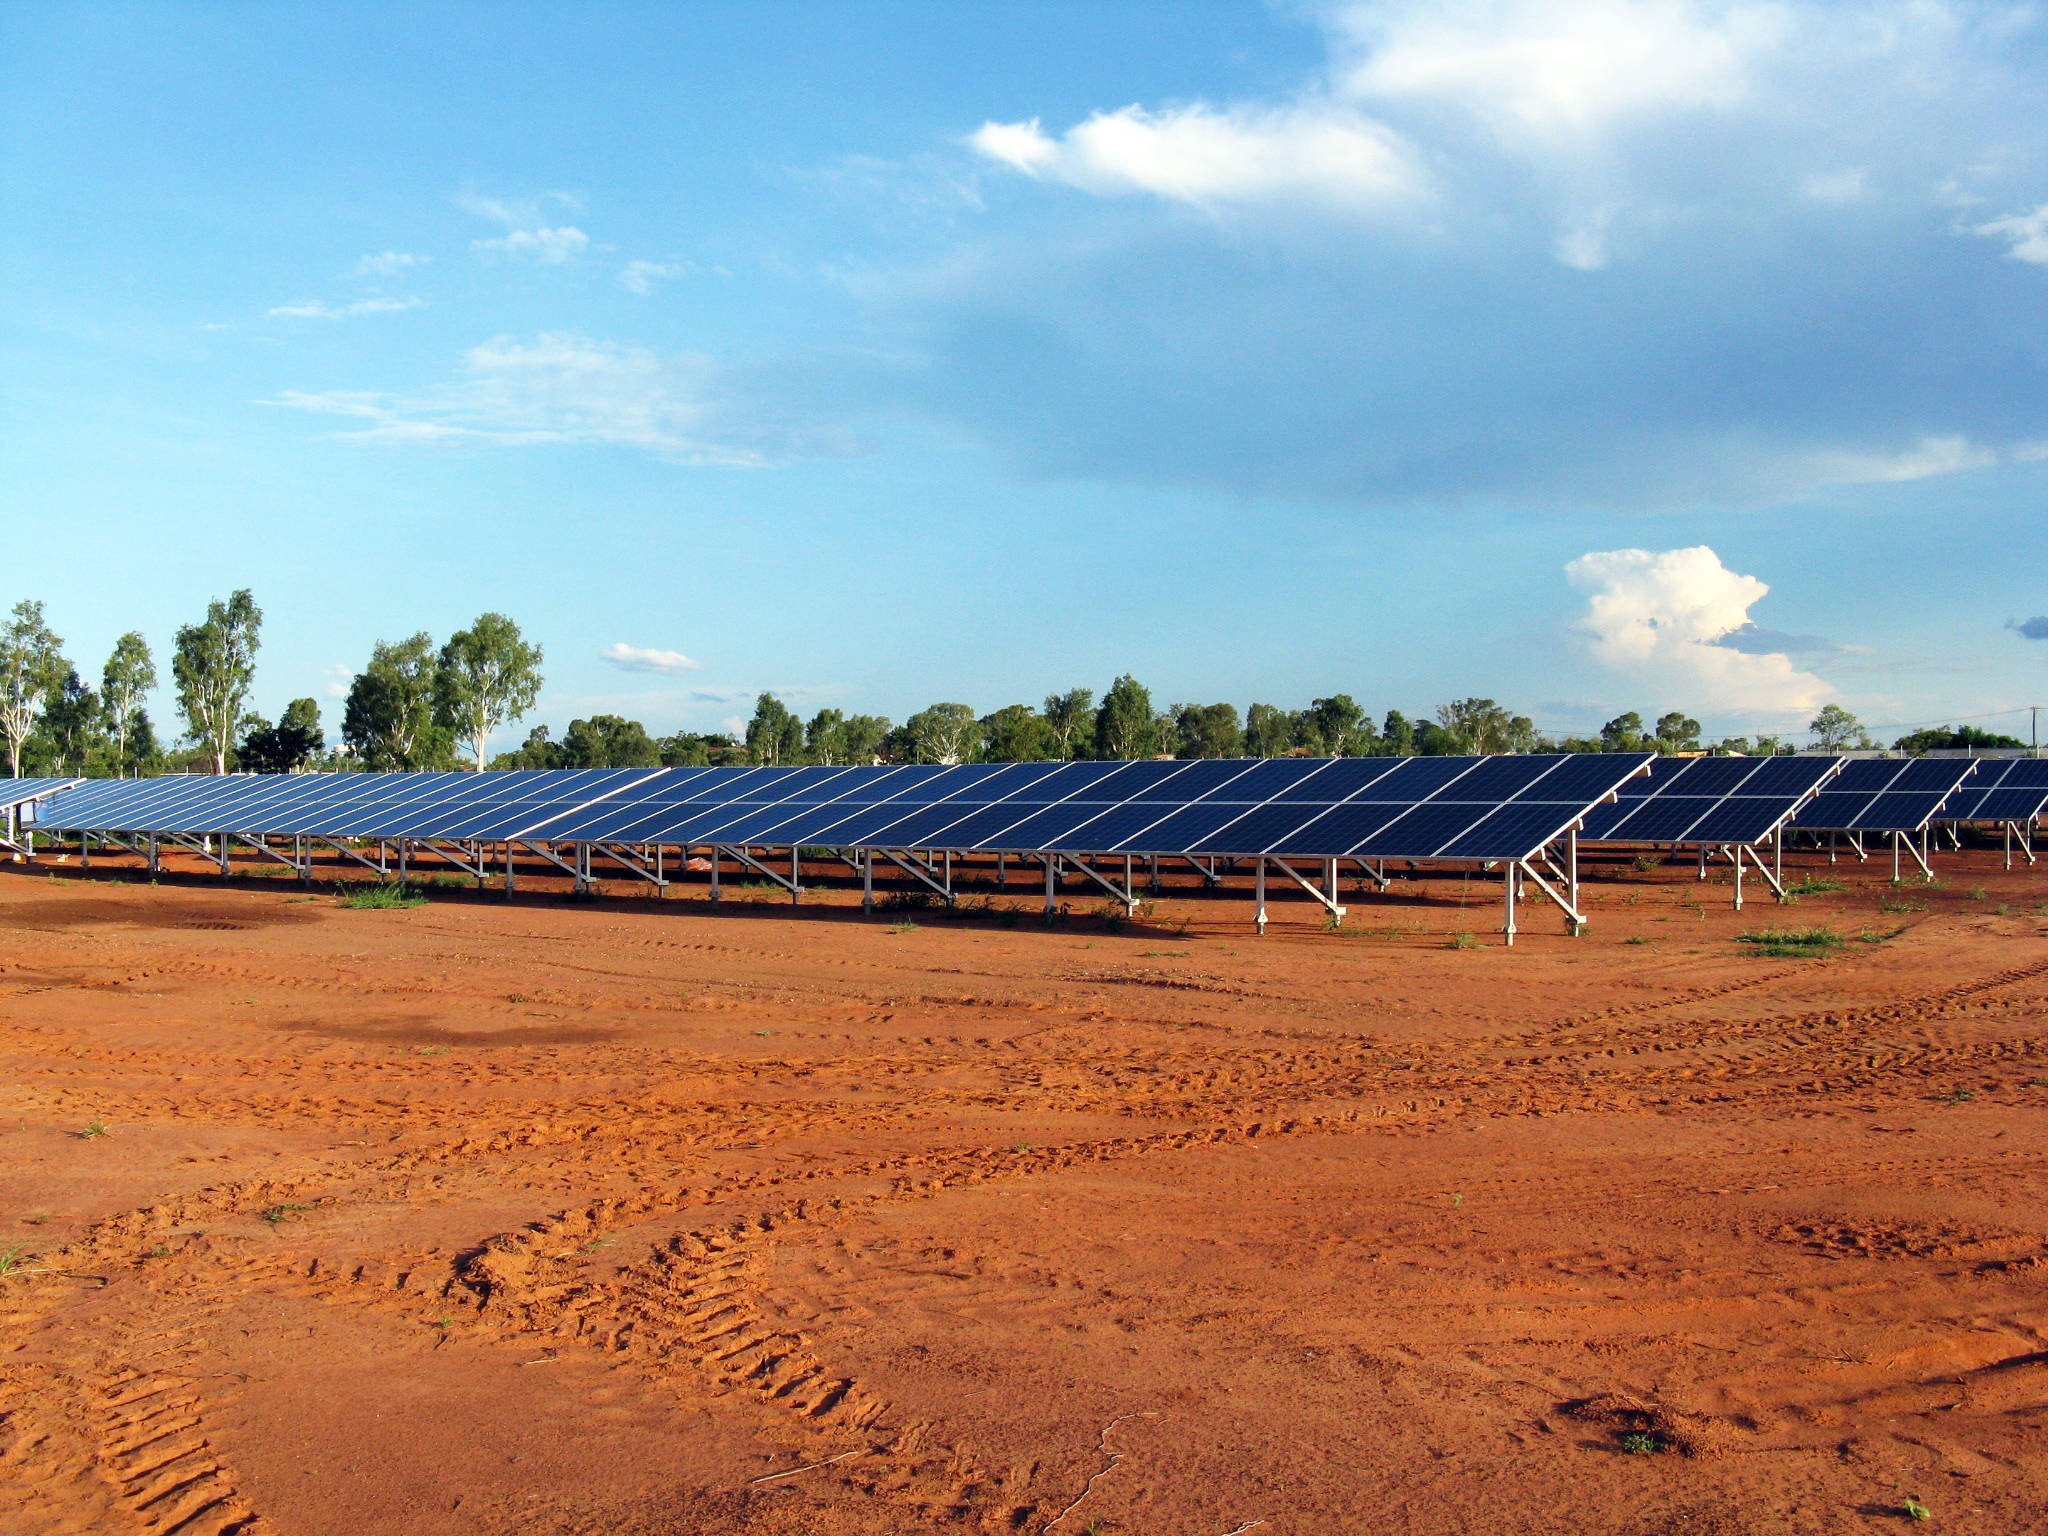 Large number of solar panels in a paddock called a solar farm